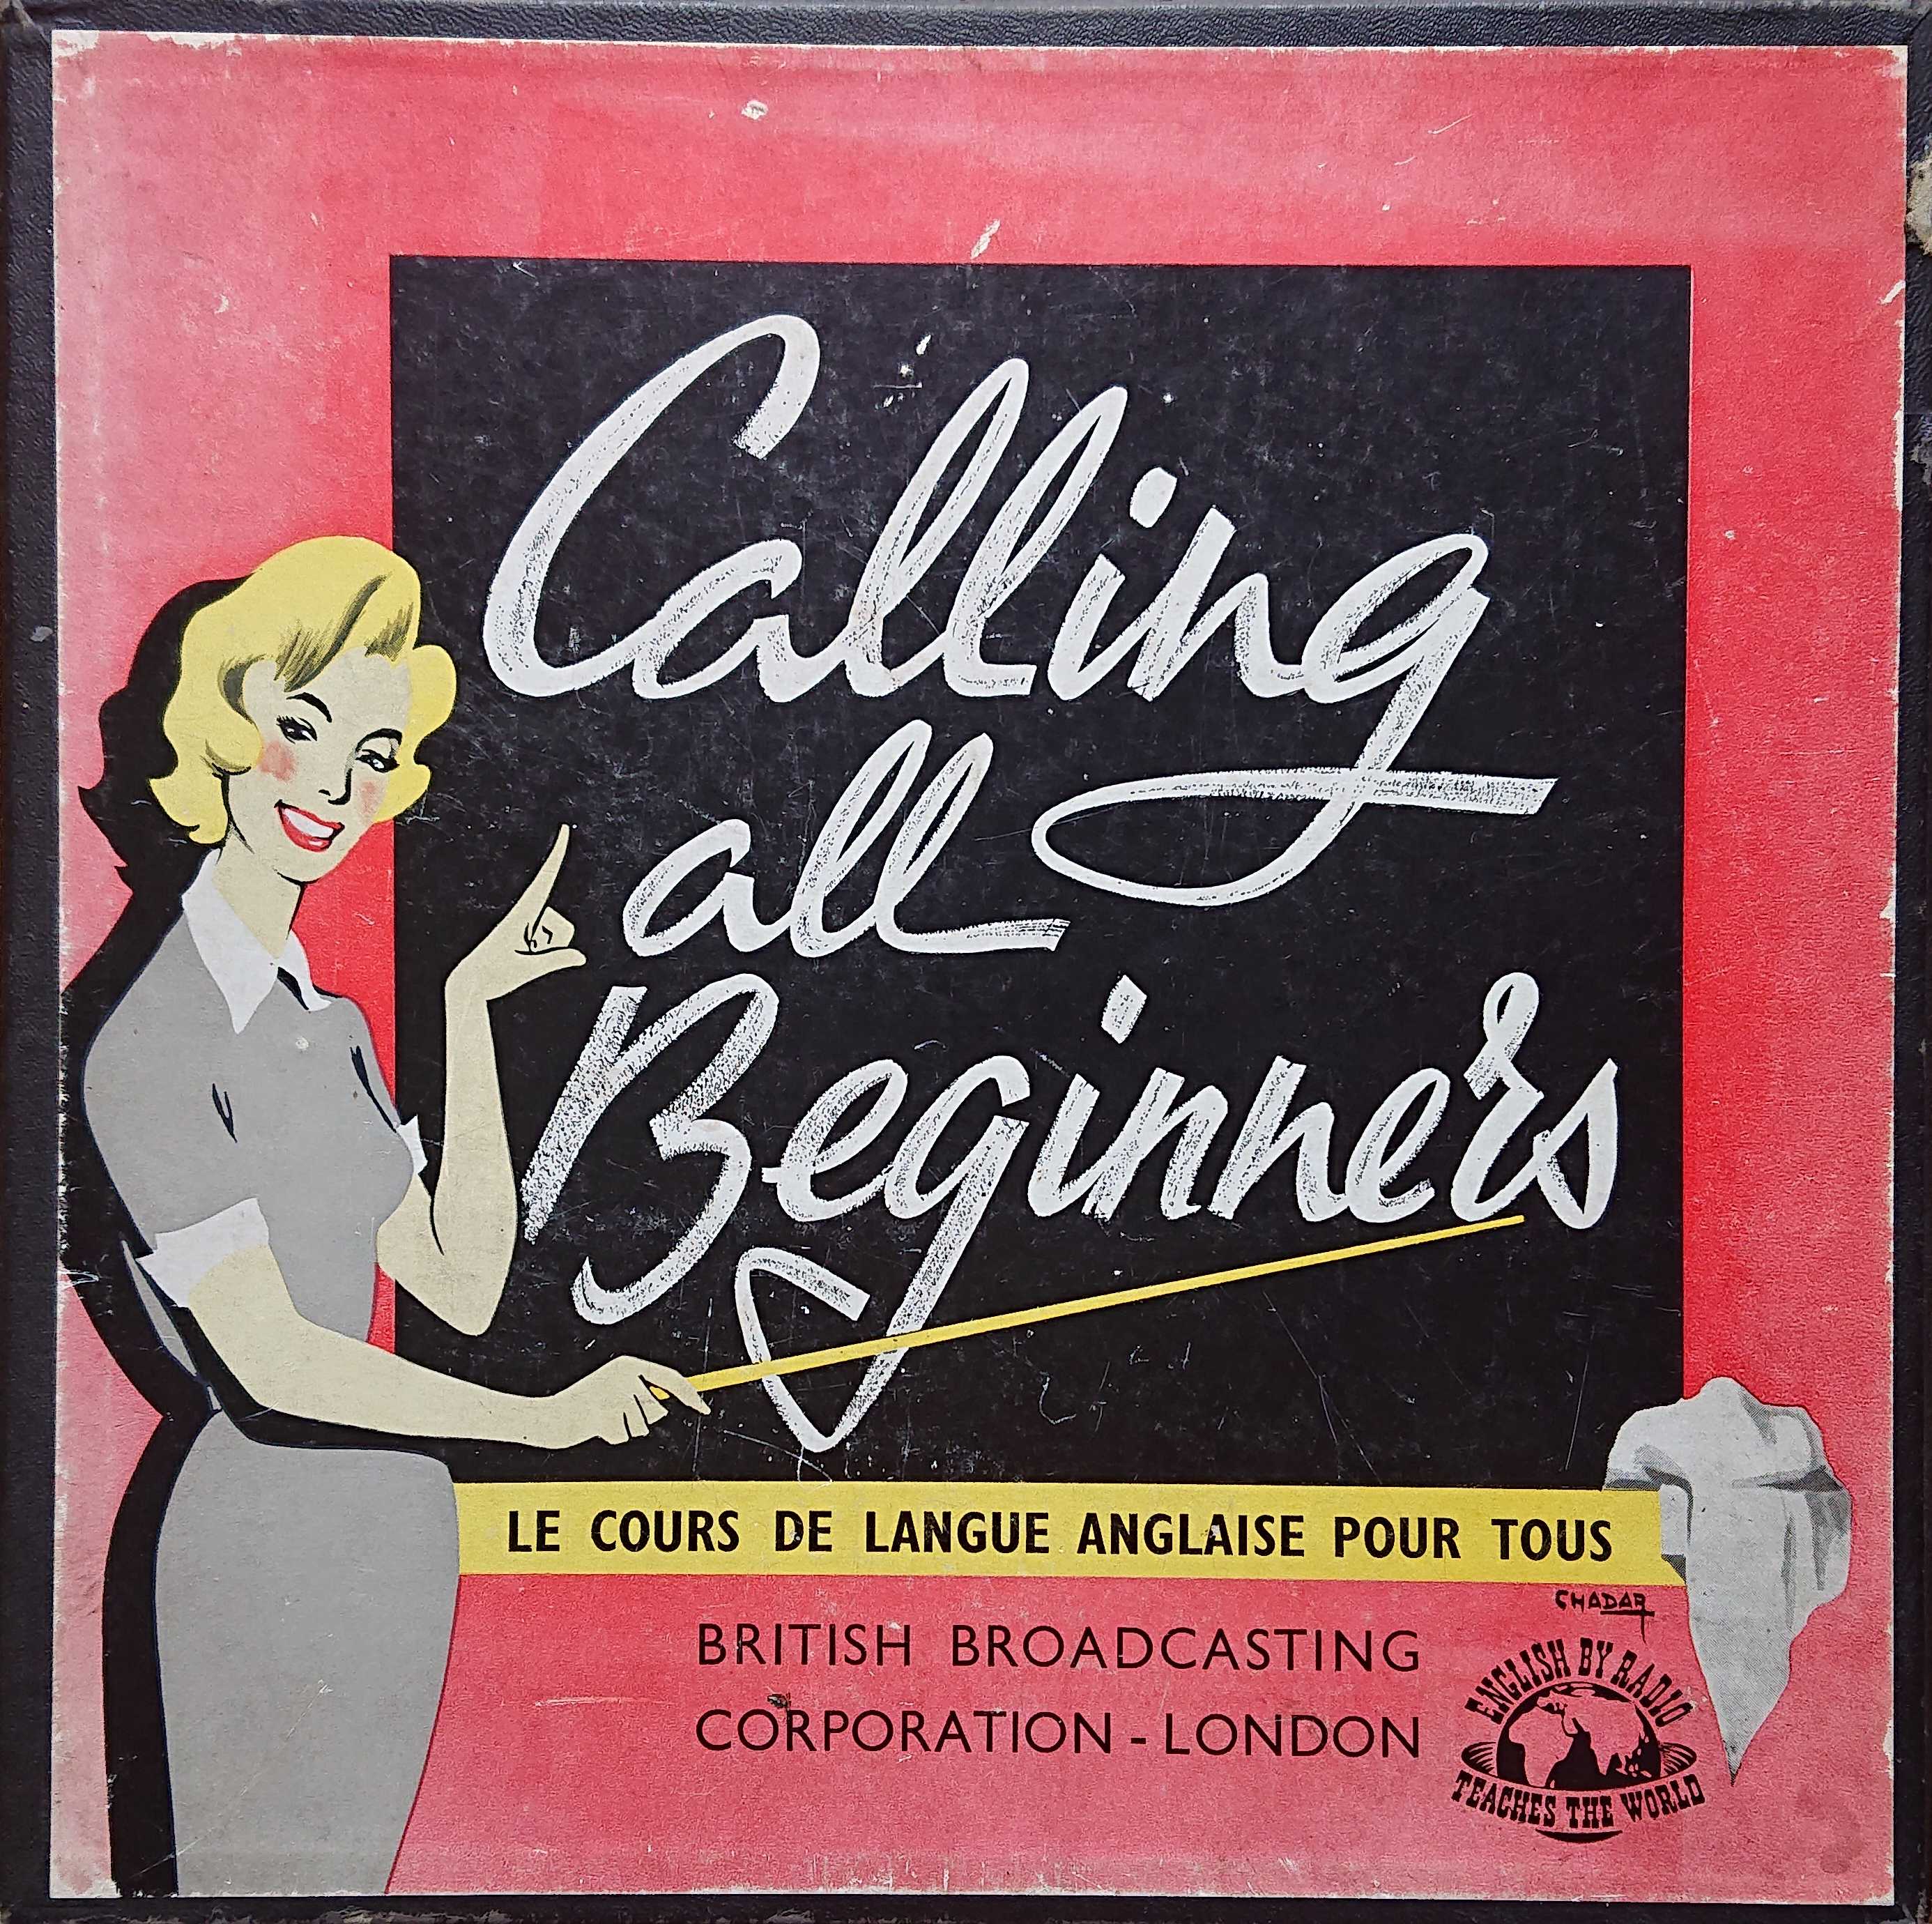 Picture of CAB 1-4 DU Calling all beginners - Dutch import by artist Various from the BBC records and Tapes library